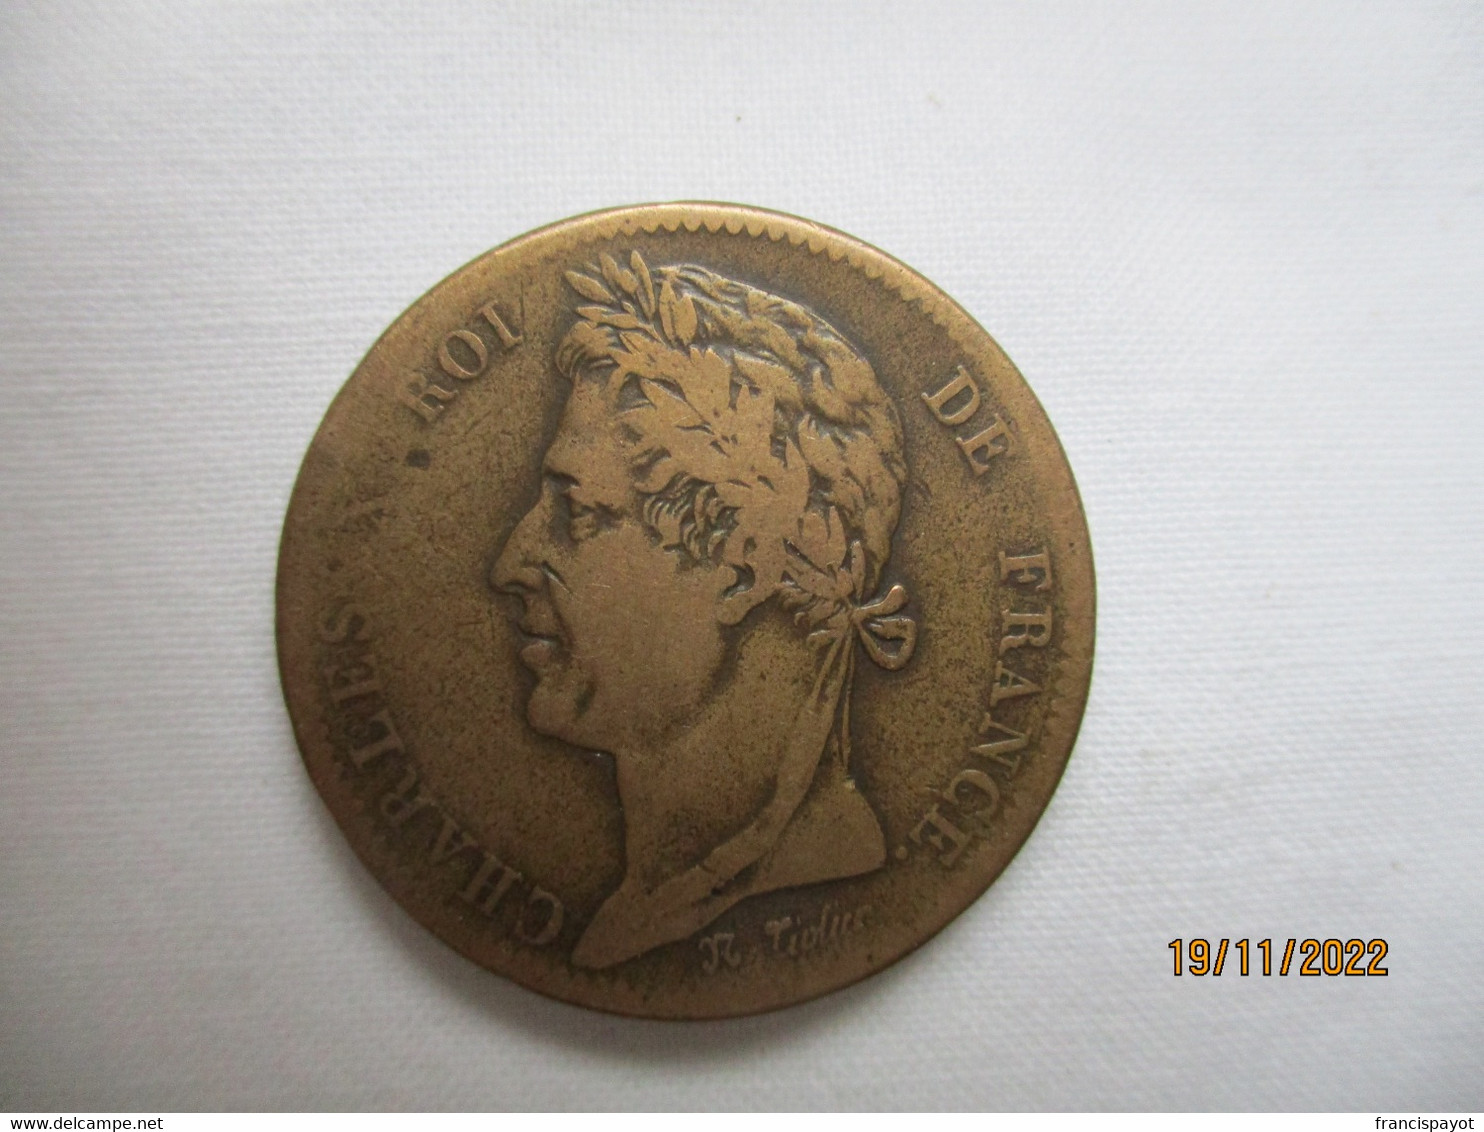 France: 10 Centimes Colonies 1825 - French Colonies (1817-1844)